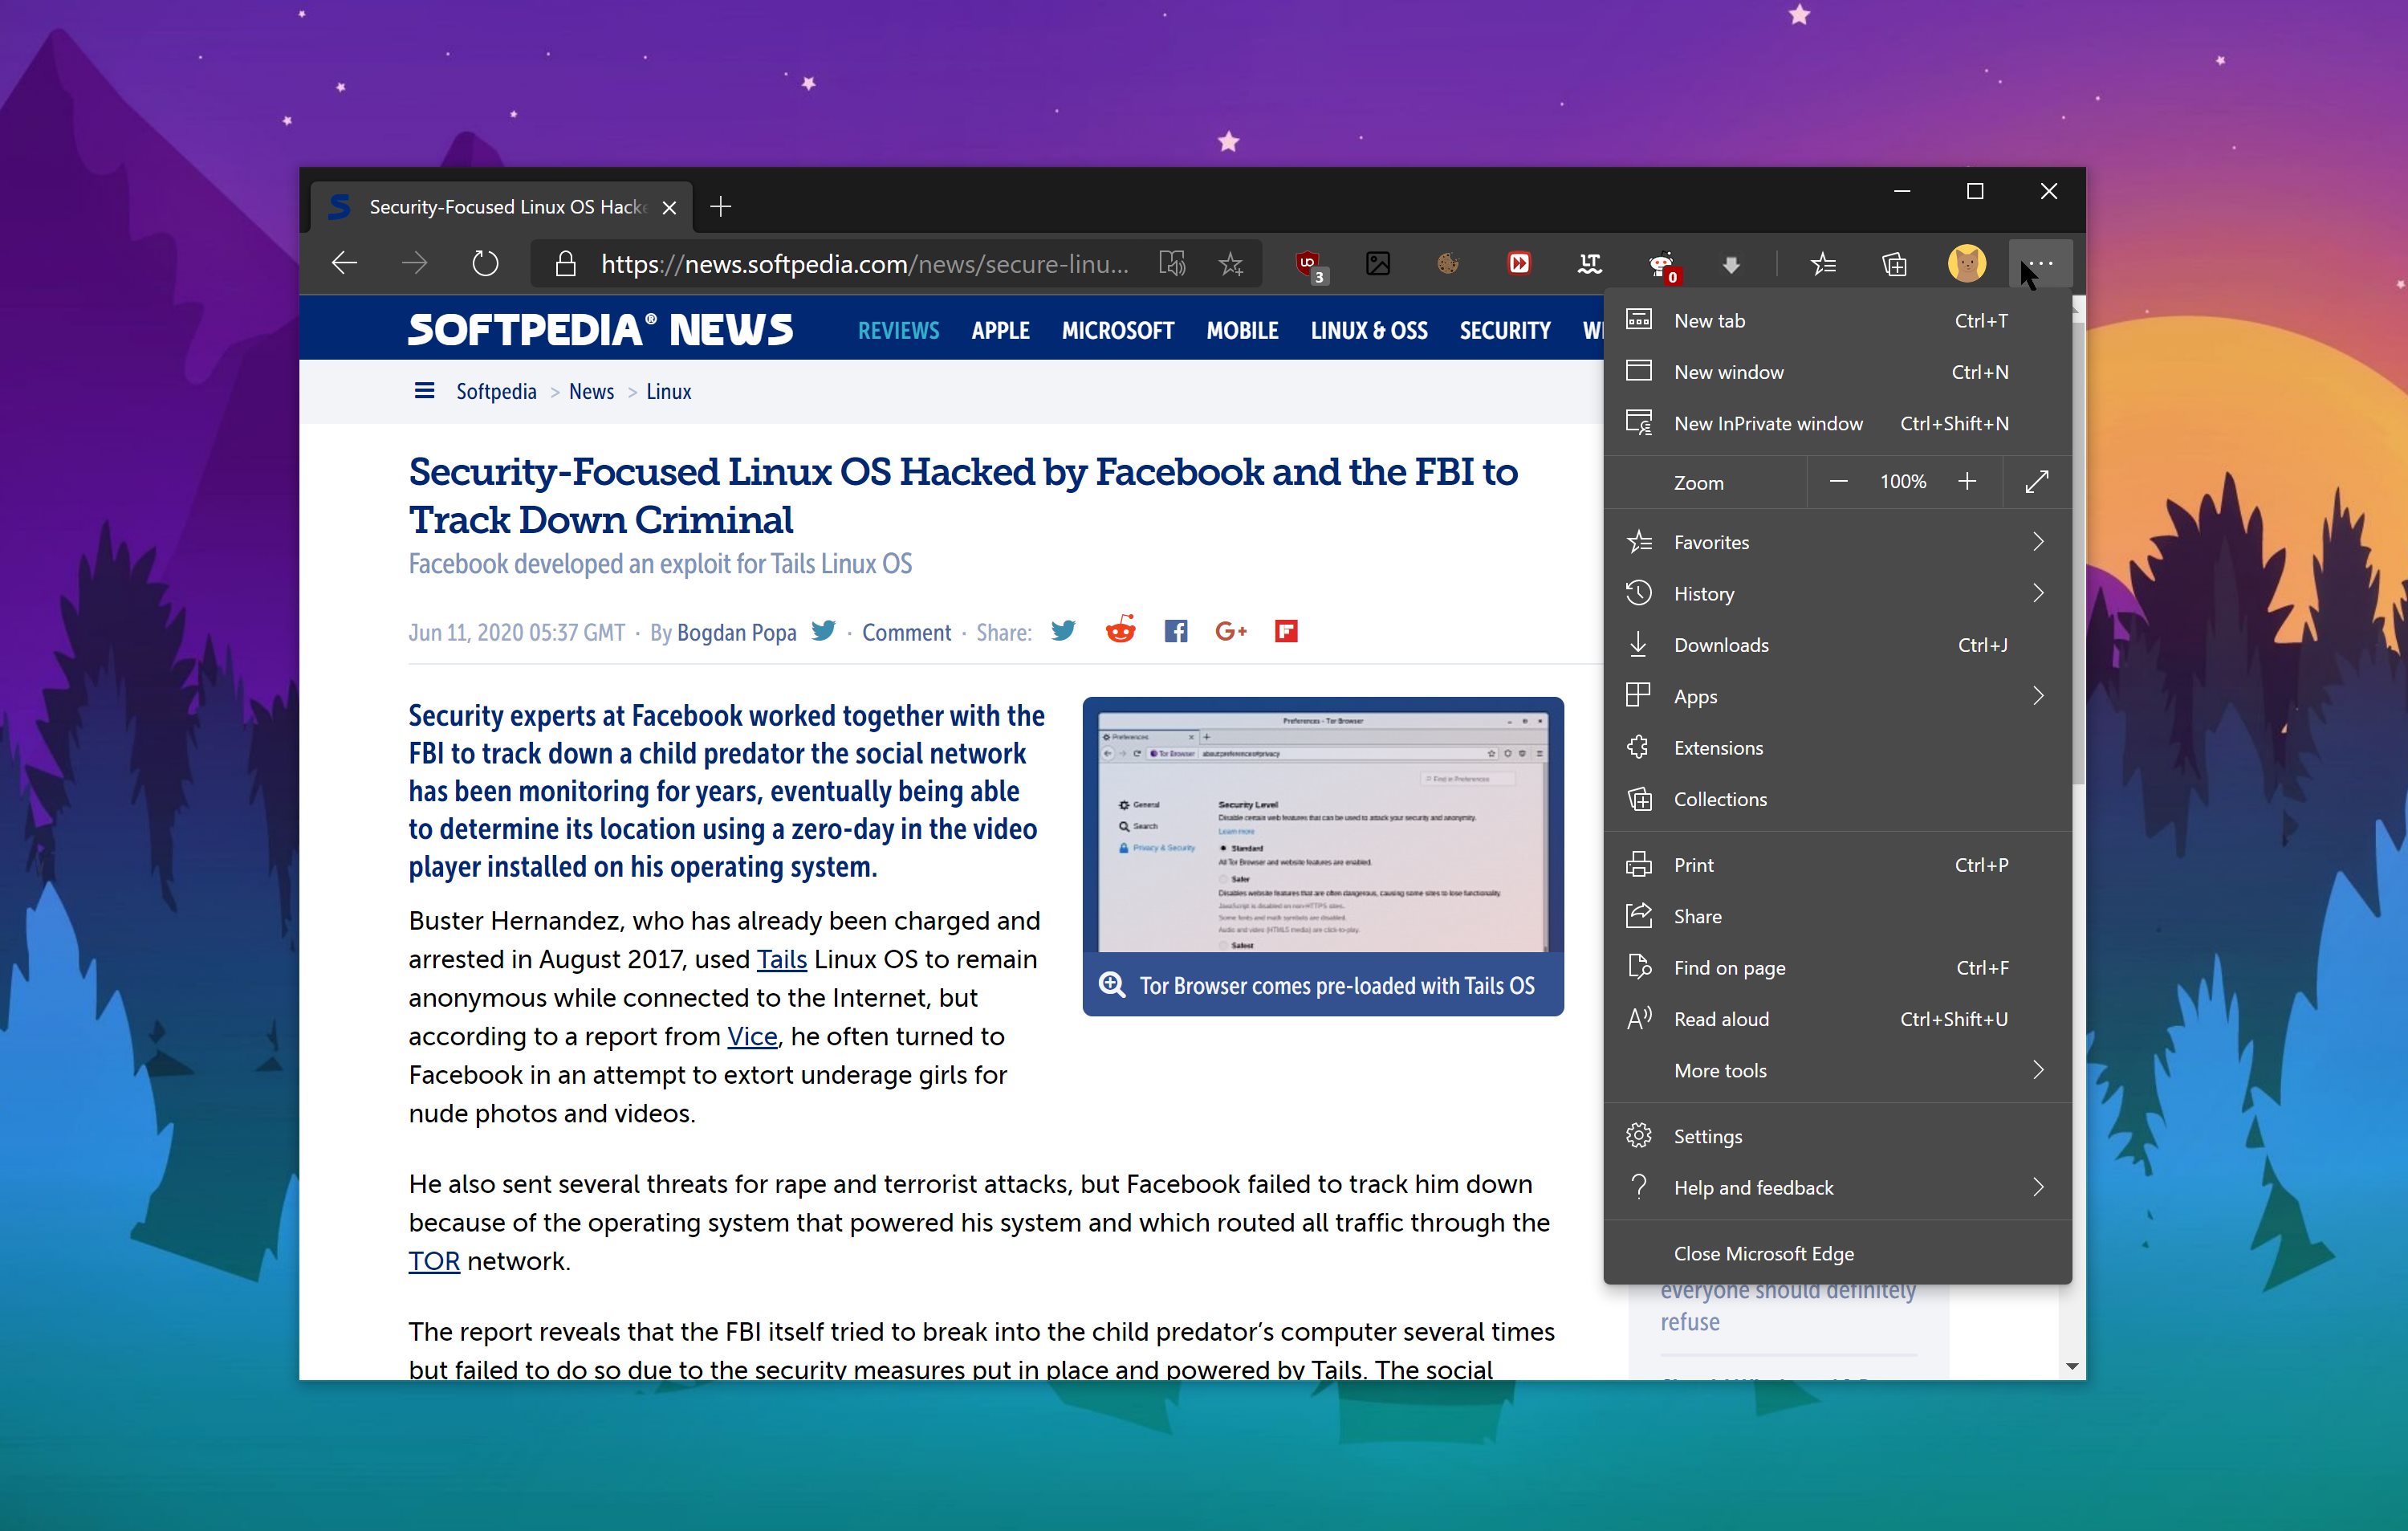 New Features Coming To Microsoft Edge Browser